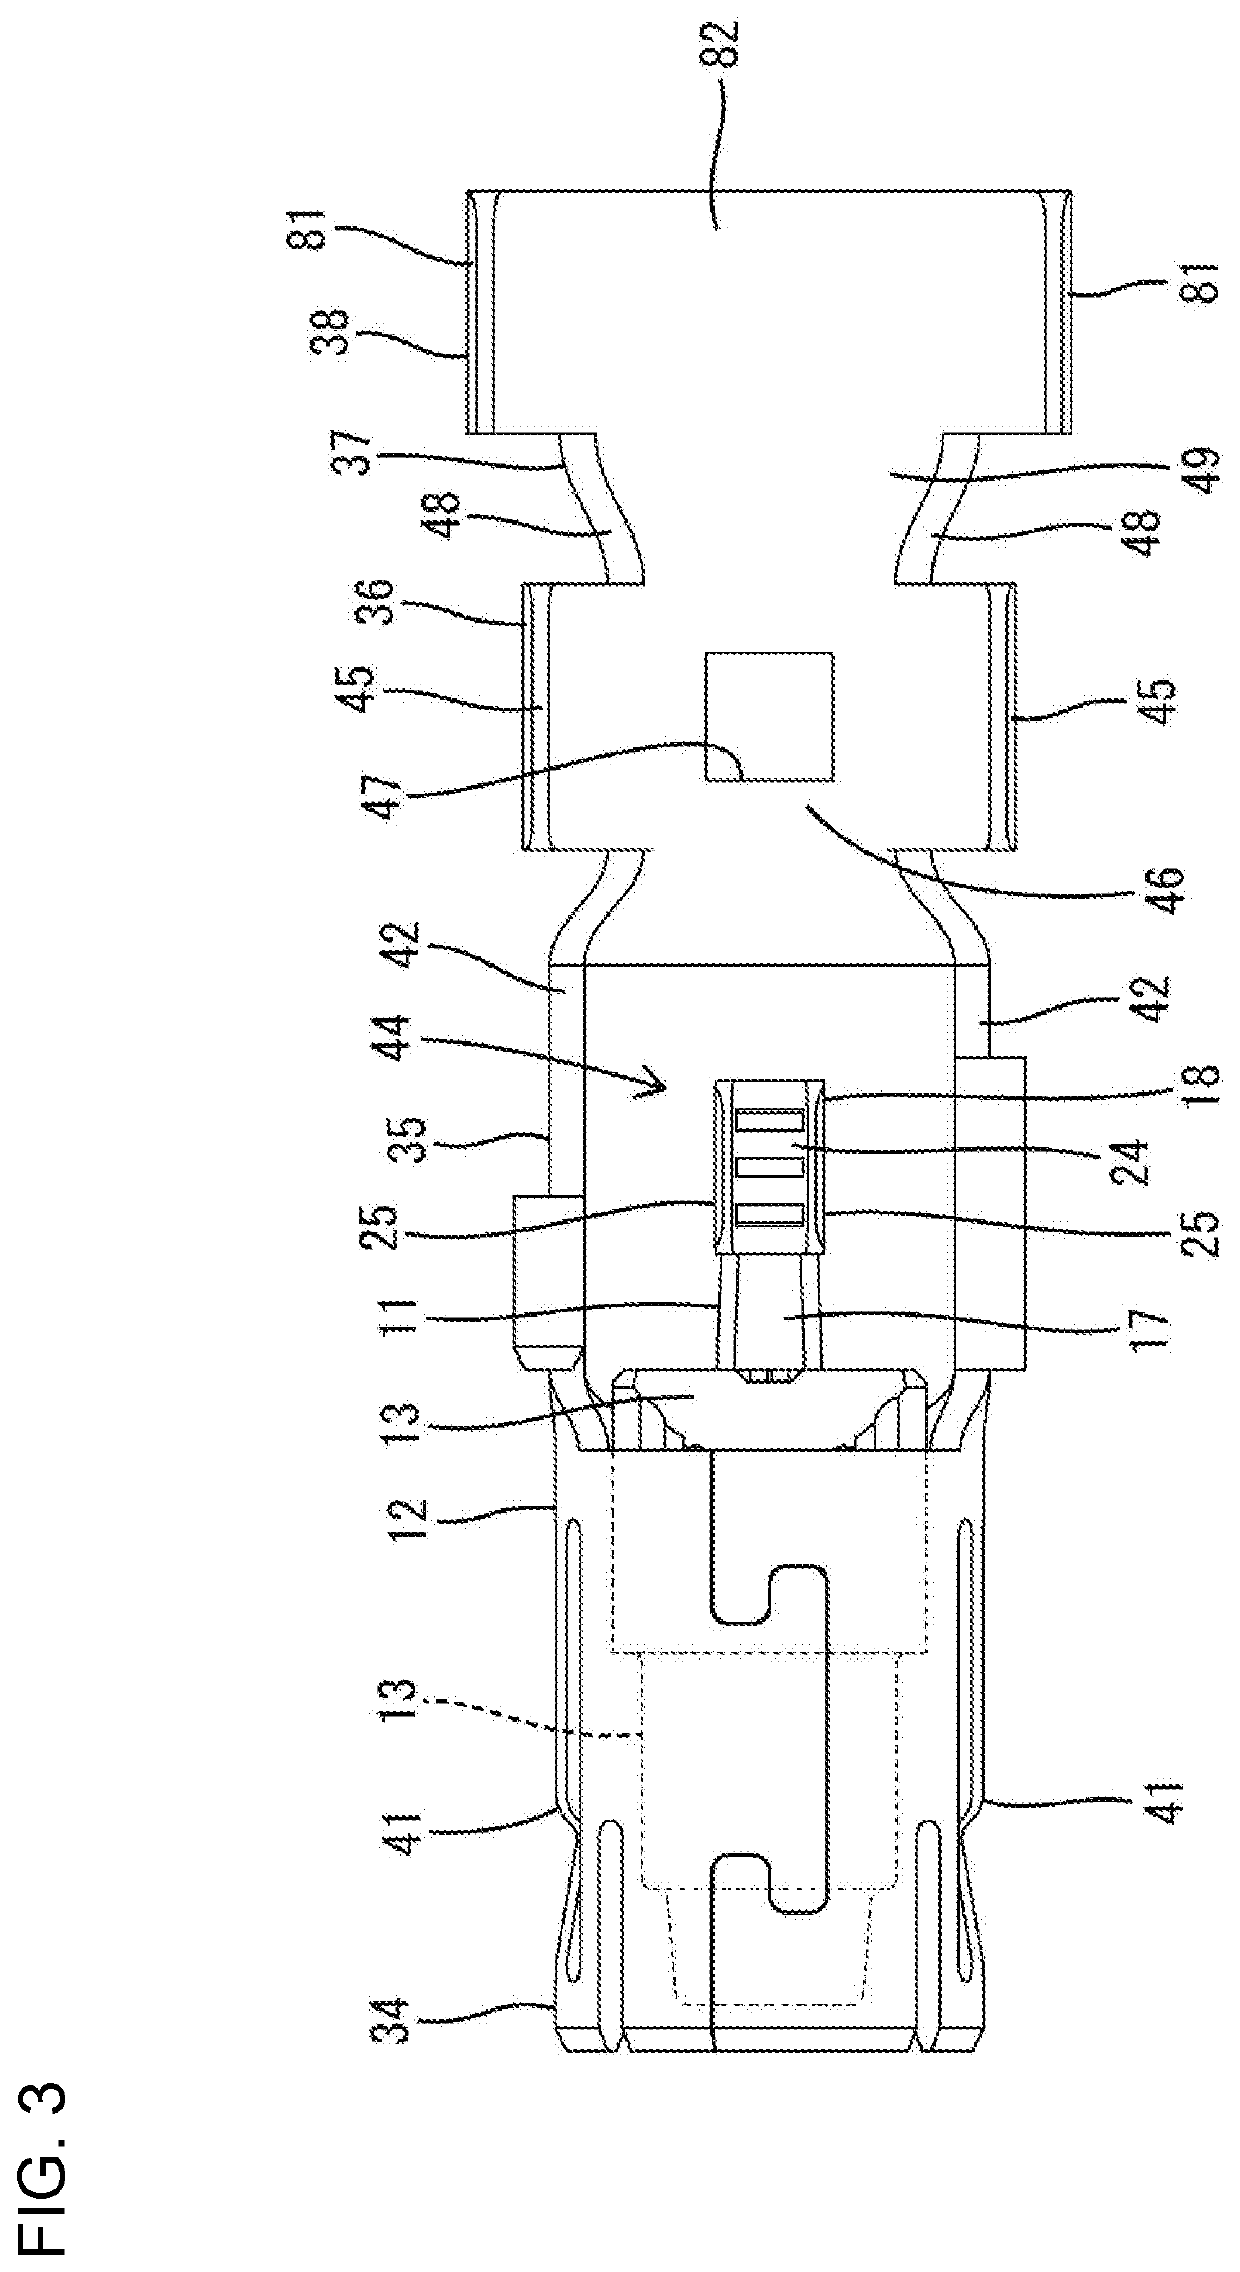 Terminal fitting for coaxial connector